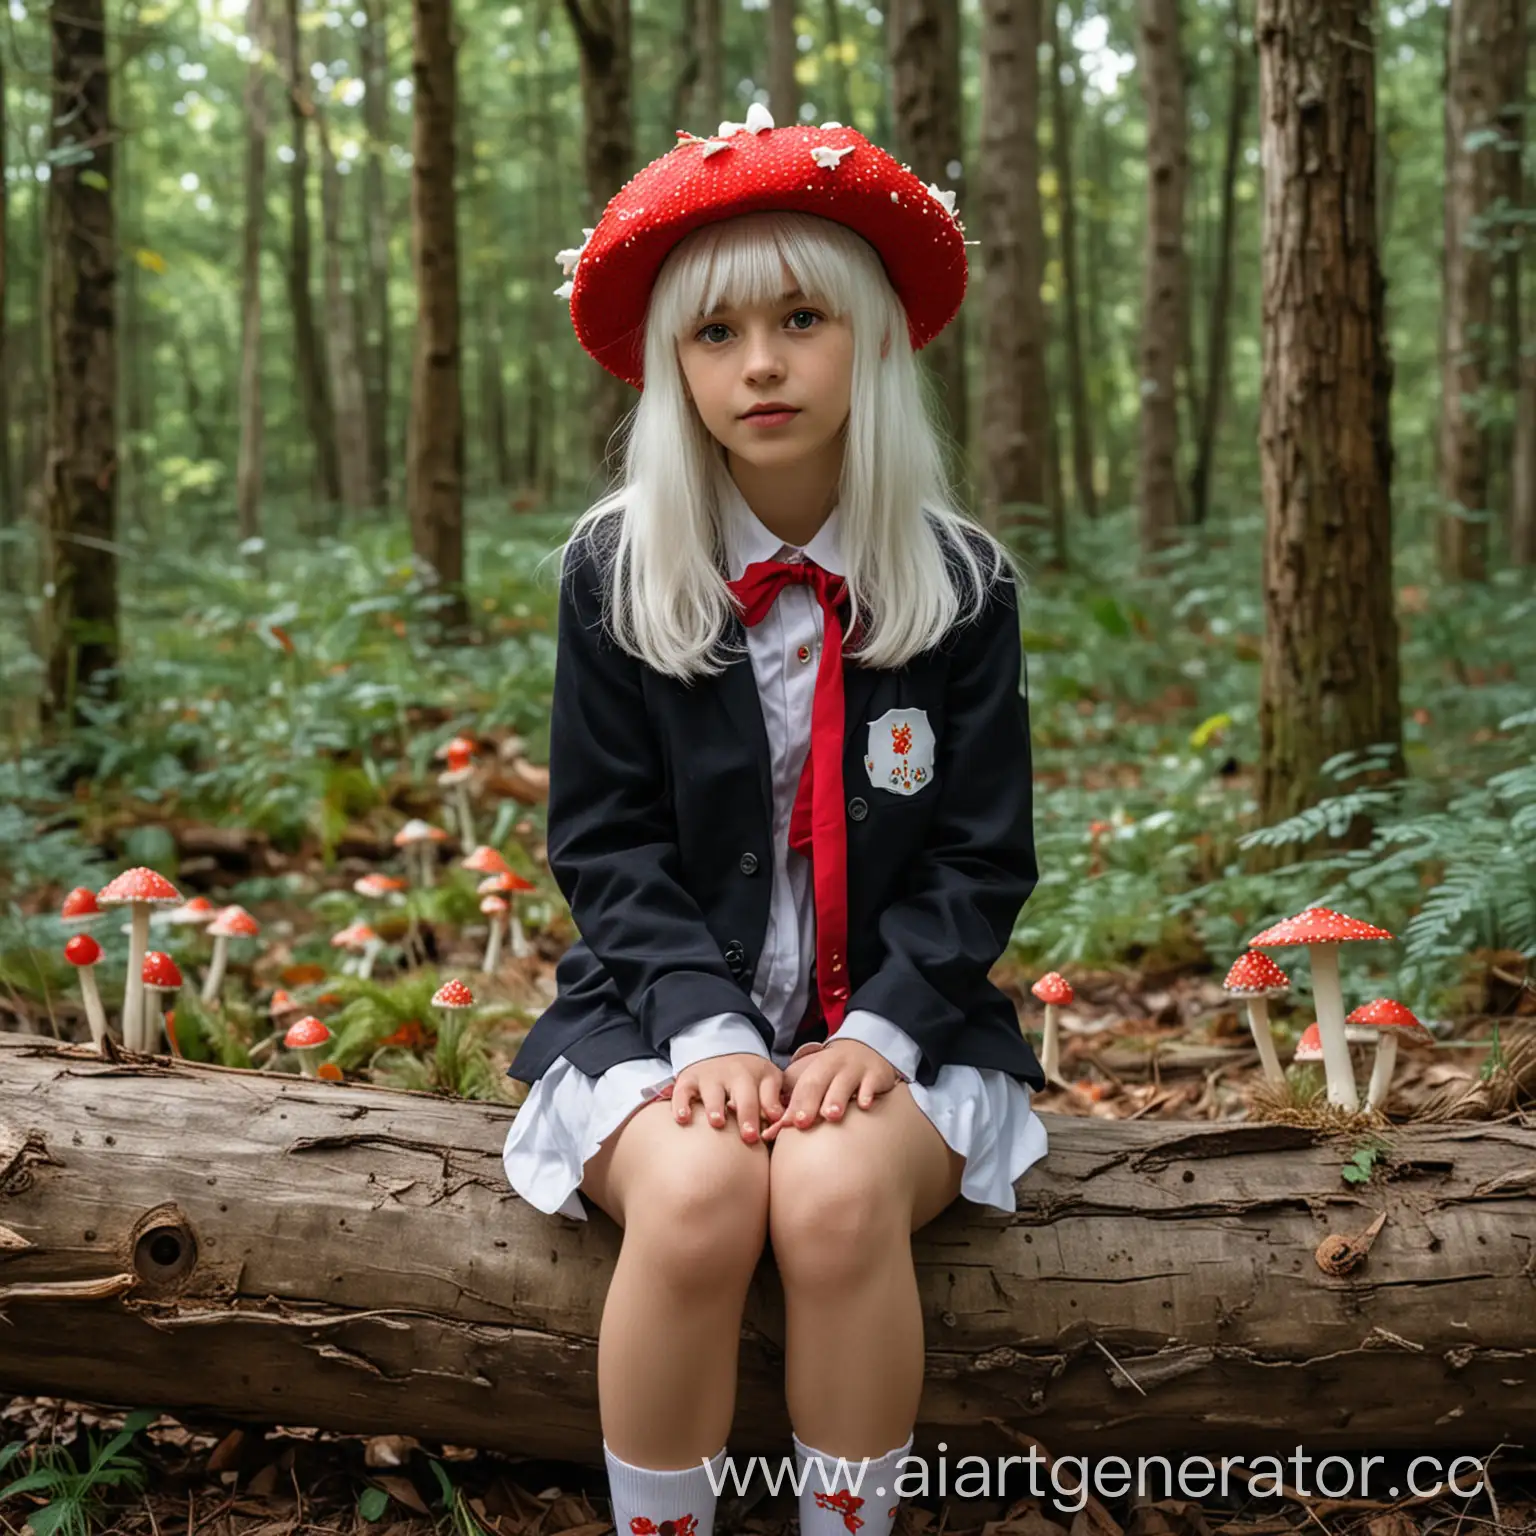 Enchanting-Forest-Scene-WhiteHaired-Girl-in-Fly-Agaric-Hat-and-School-Uniform